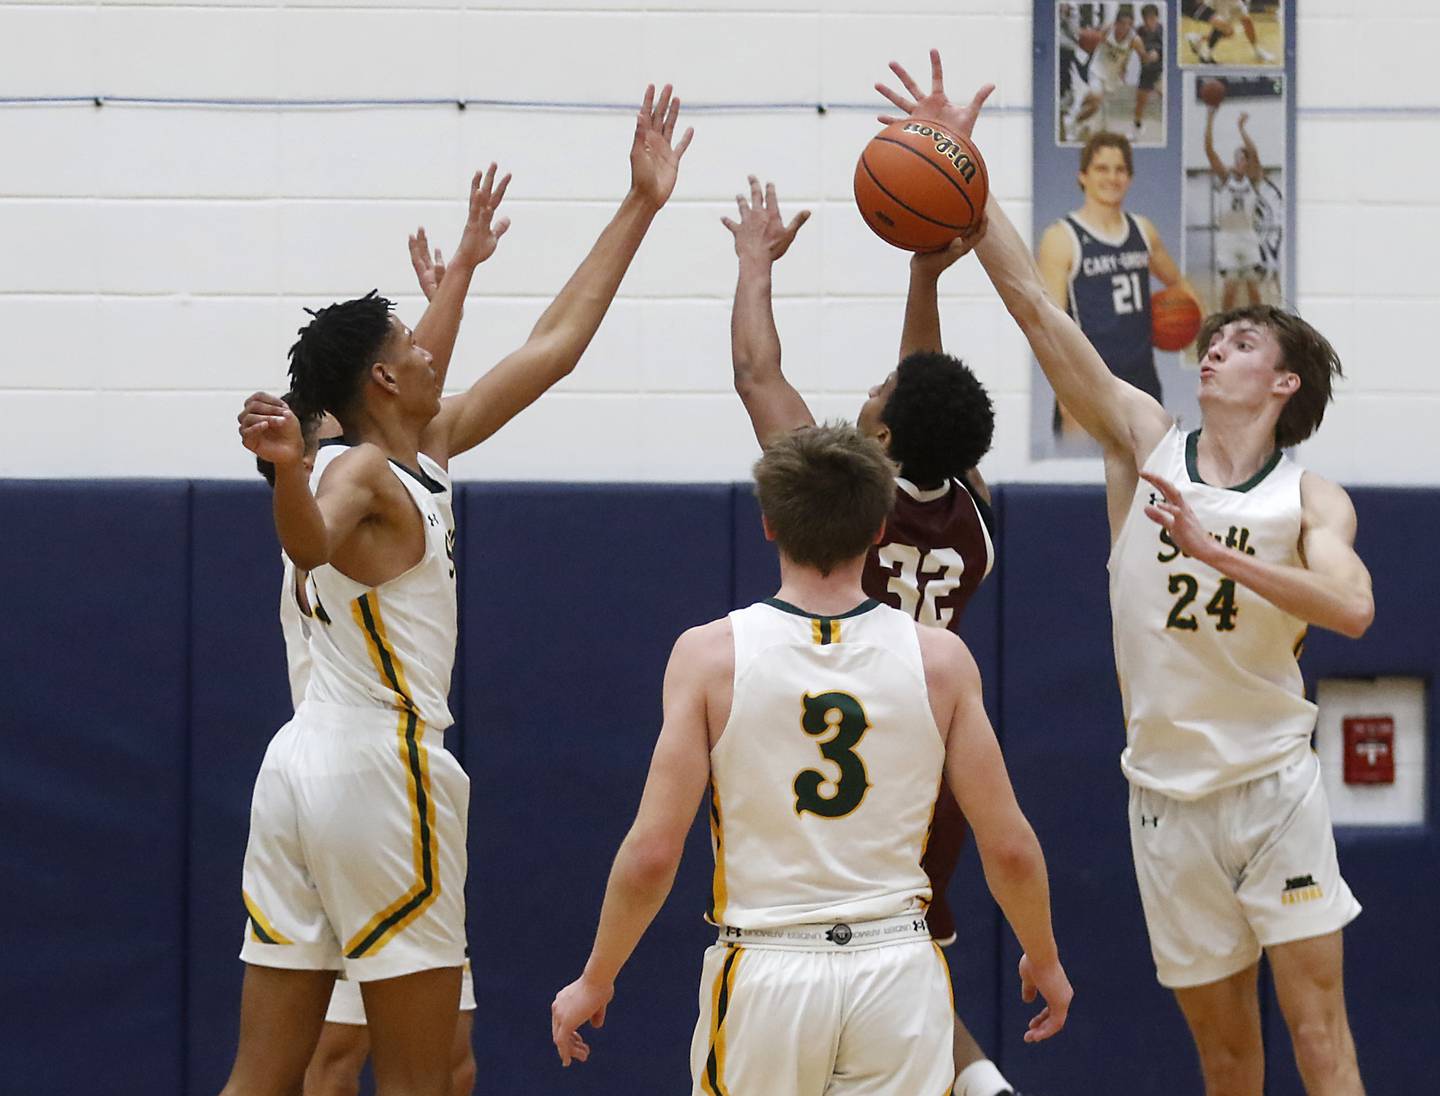 The Crystal Lake South defense calliopes on Wheaton Academy's Wandy Munoz as he trie to shoot the ball during the IHSA Class 3A Cary-Grove Boys Basketball Regional Championship game on Friday, Feb. 23, 2024 at Cary-Grove High School.